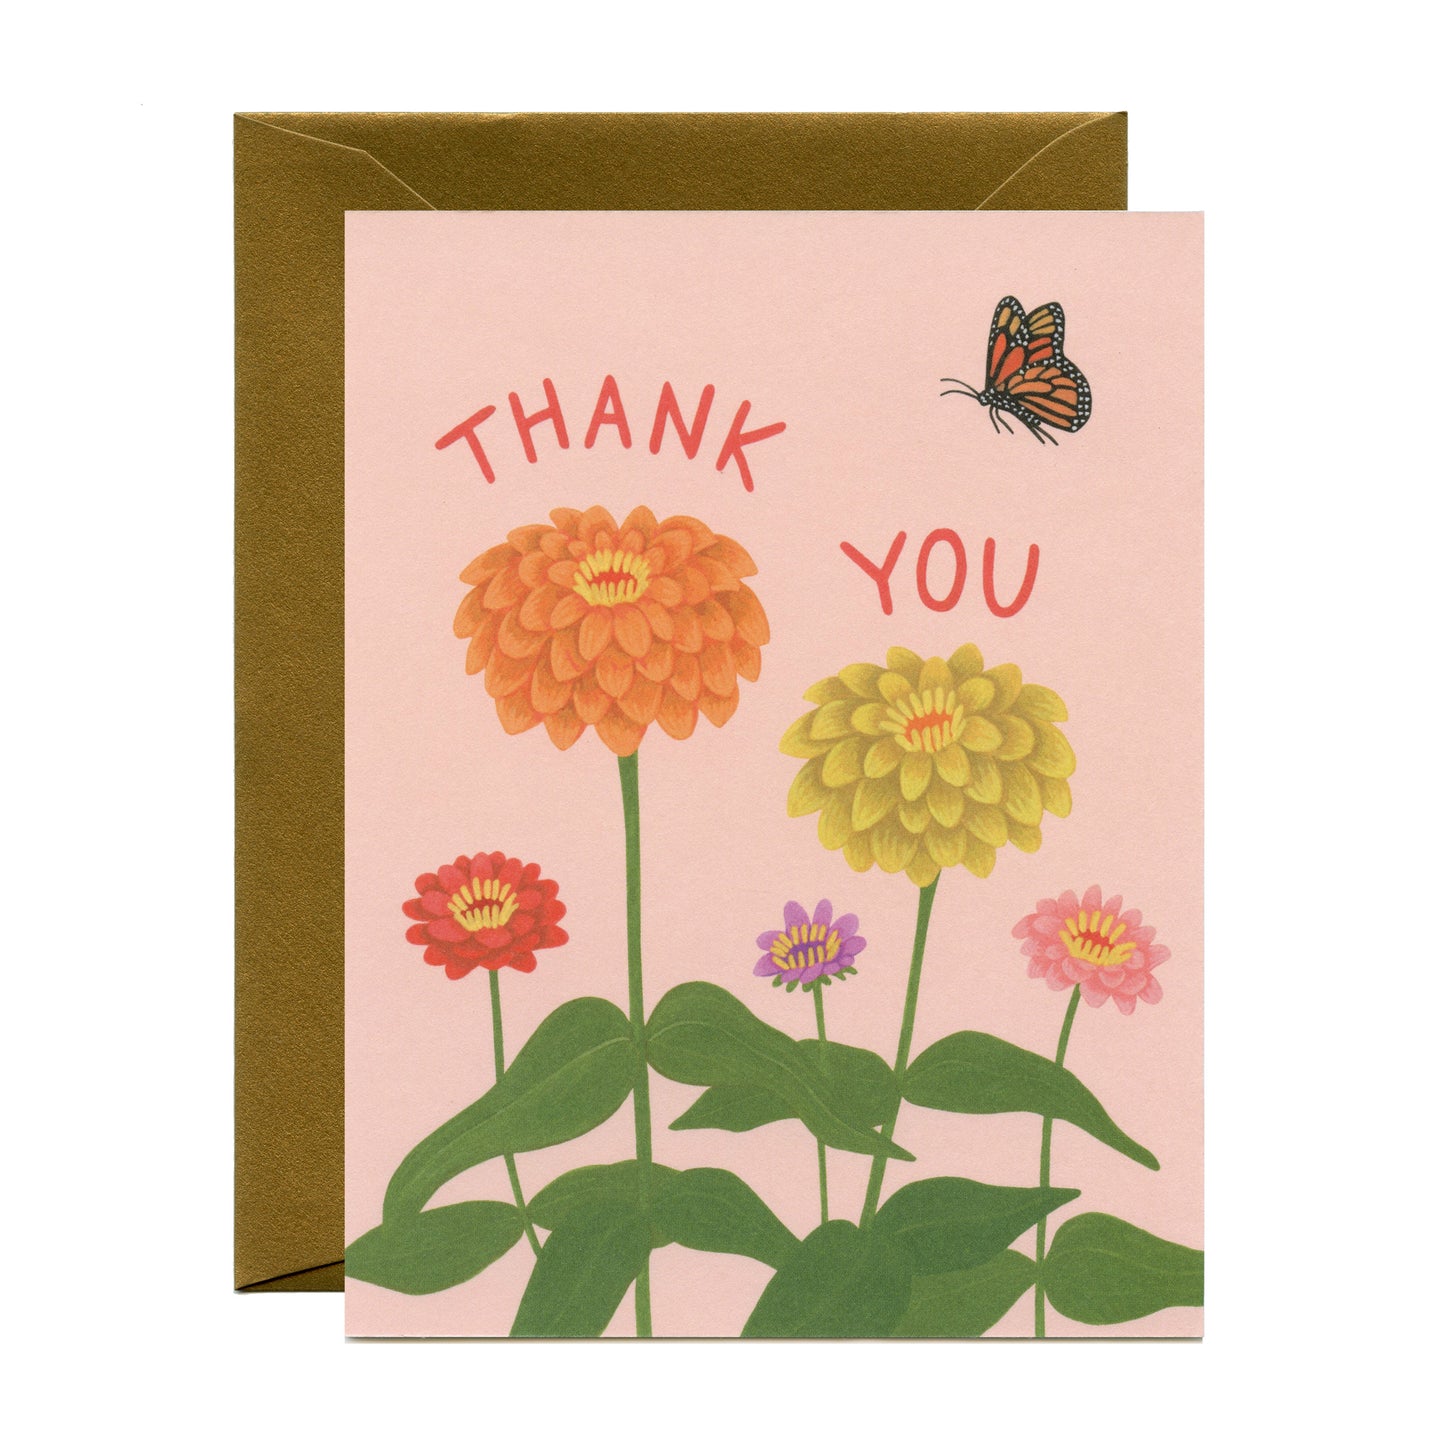 FLOWERS - THANK YOU GREETING CARDS, VARIETY BOXED SET OF 8